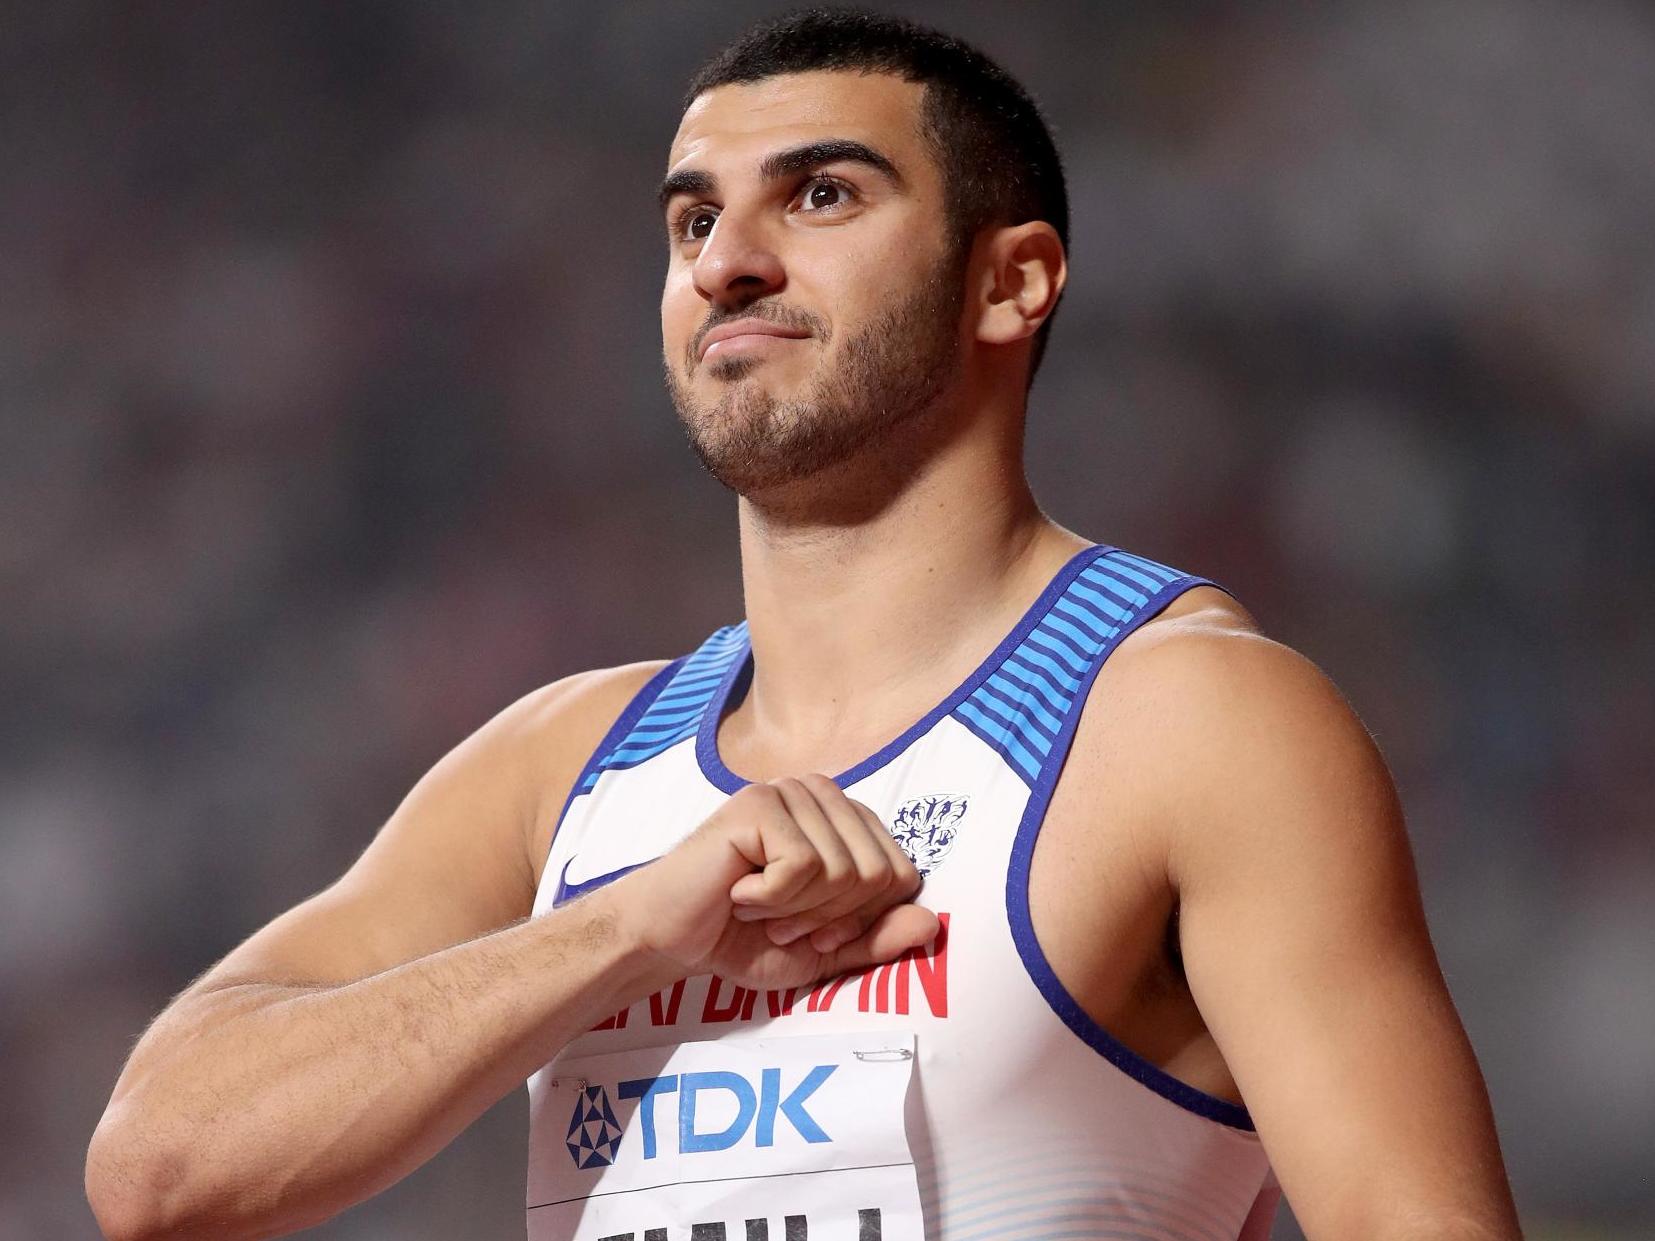 Olympic sprinter Adam Gemili is fronting the athletes' campaign for change